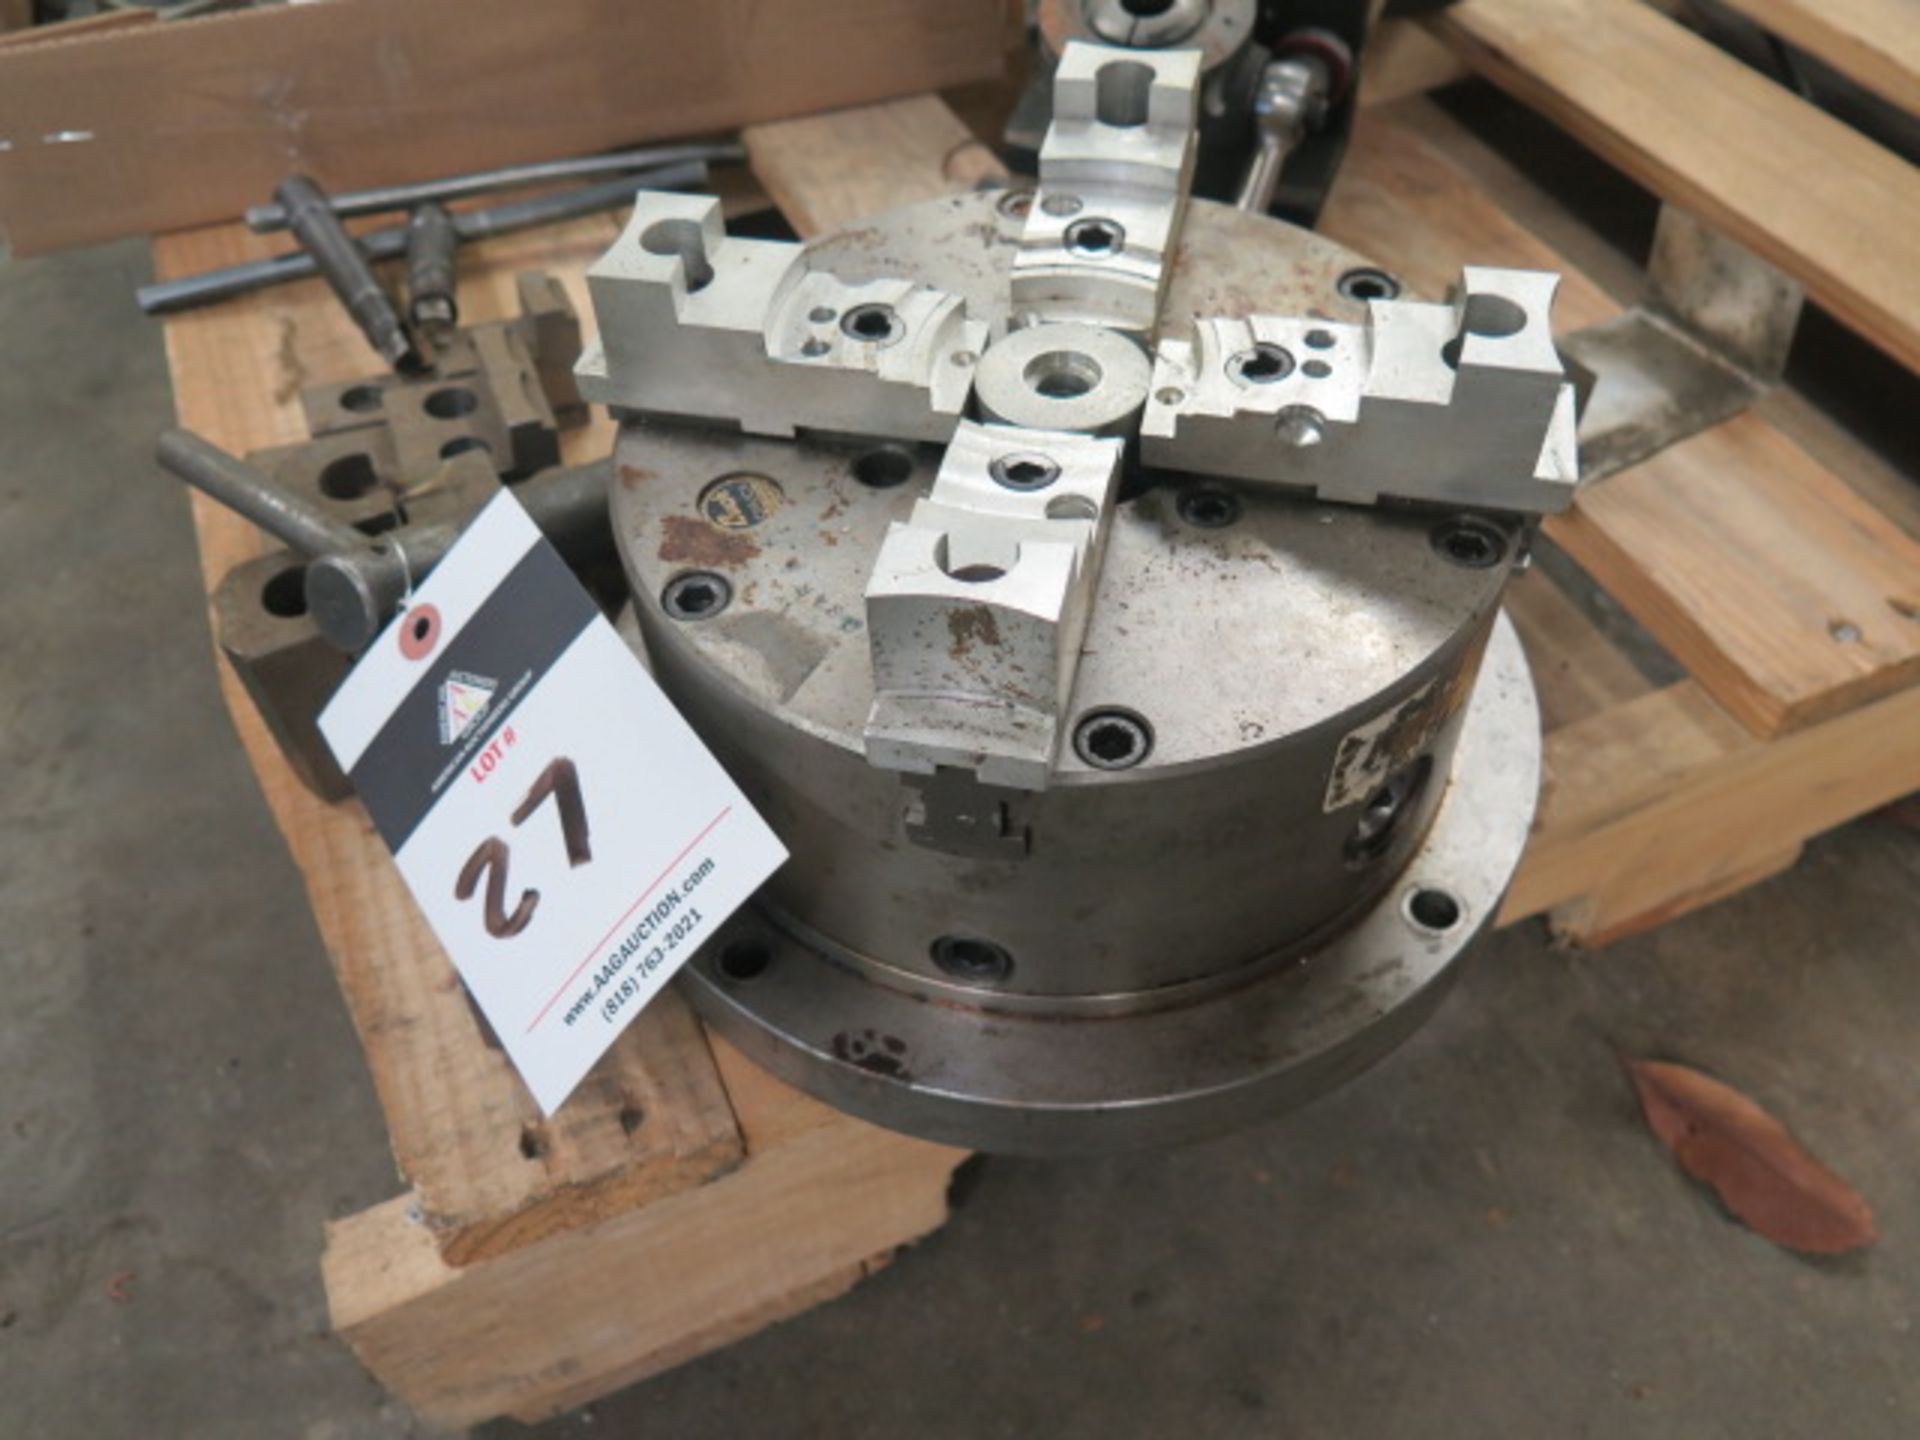 8” 4-Jaw Chuck and Misc Fixtures (FOR NIKKEN 4th AXIS)